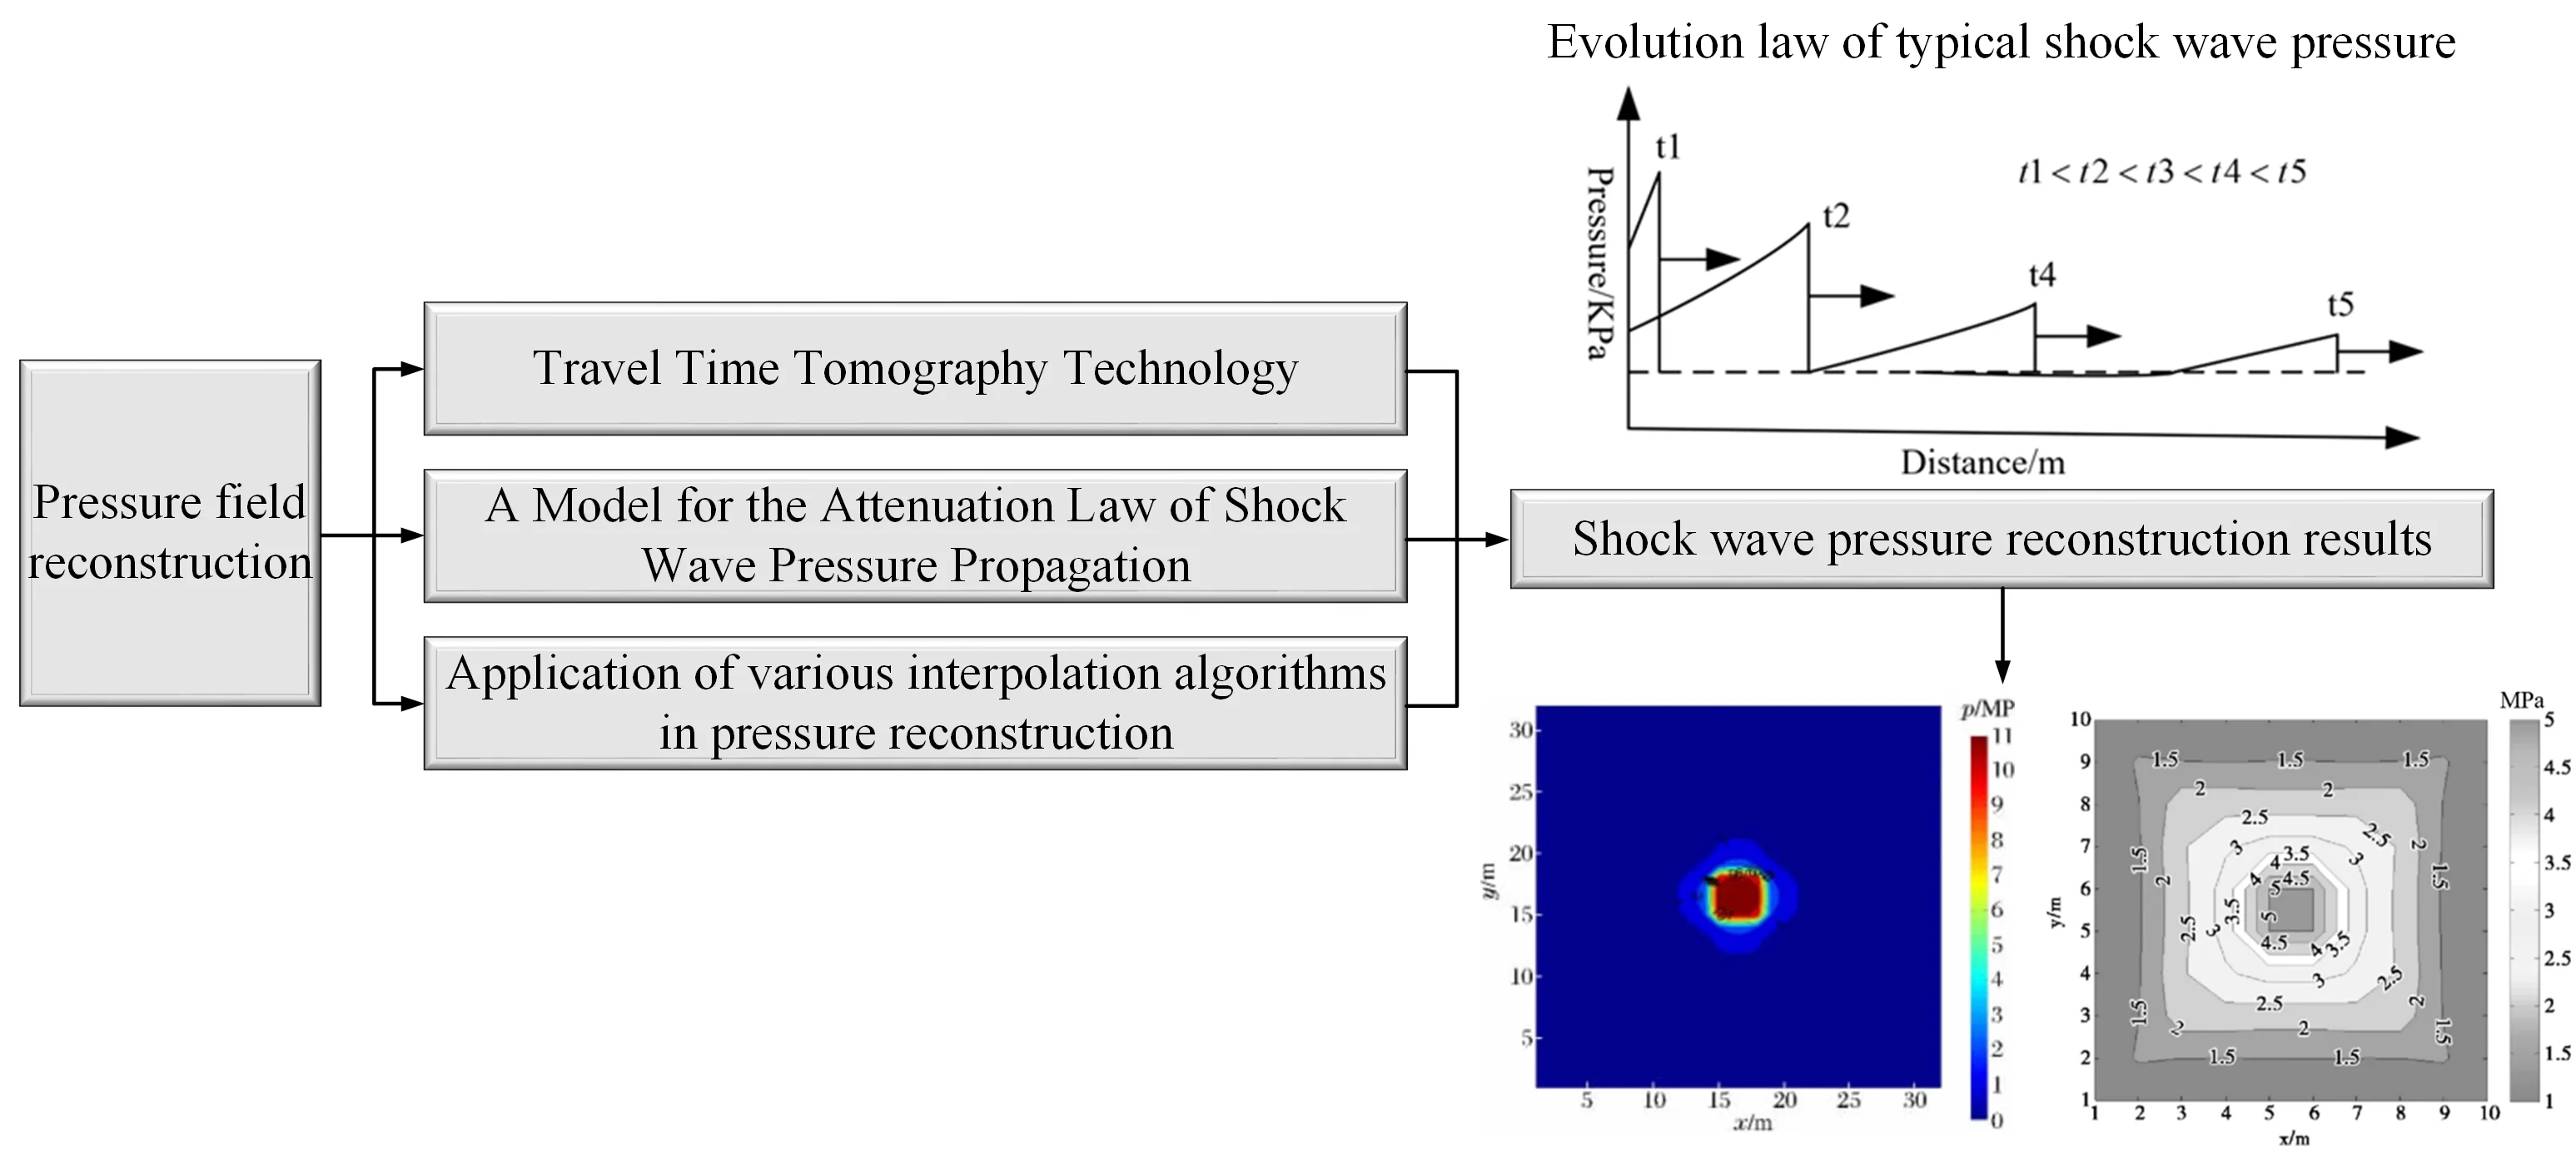 Review of shock wave pressure reconstruction methods in explosion field